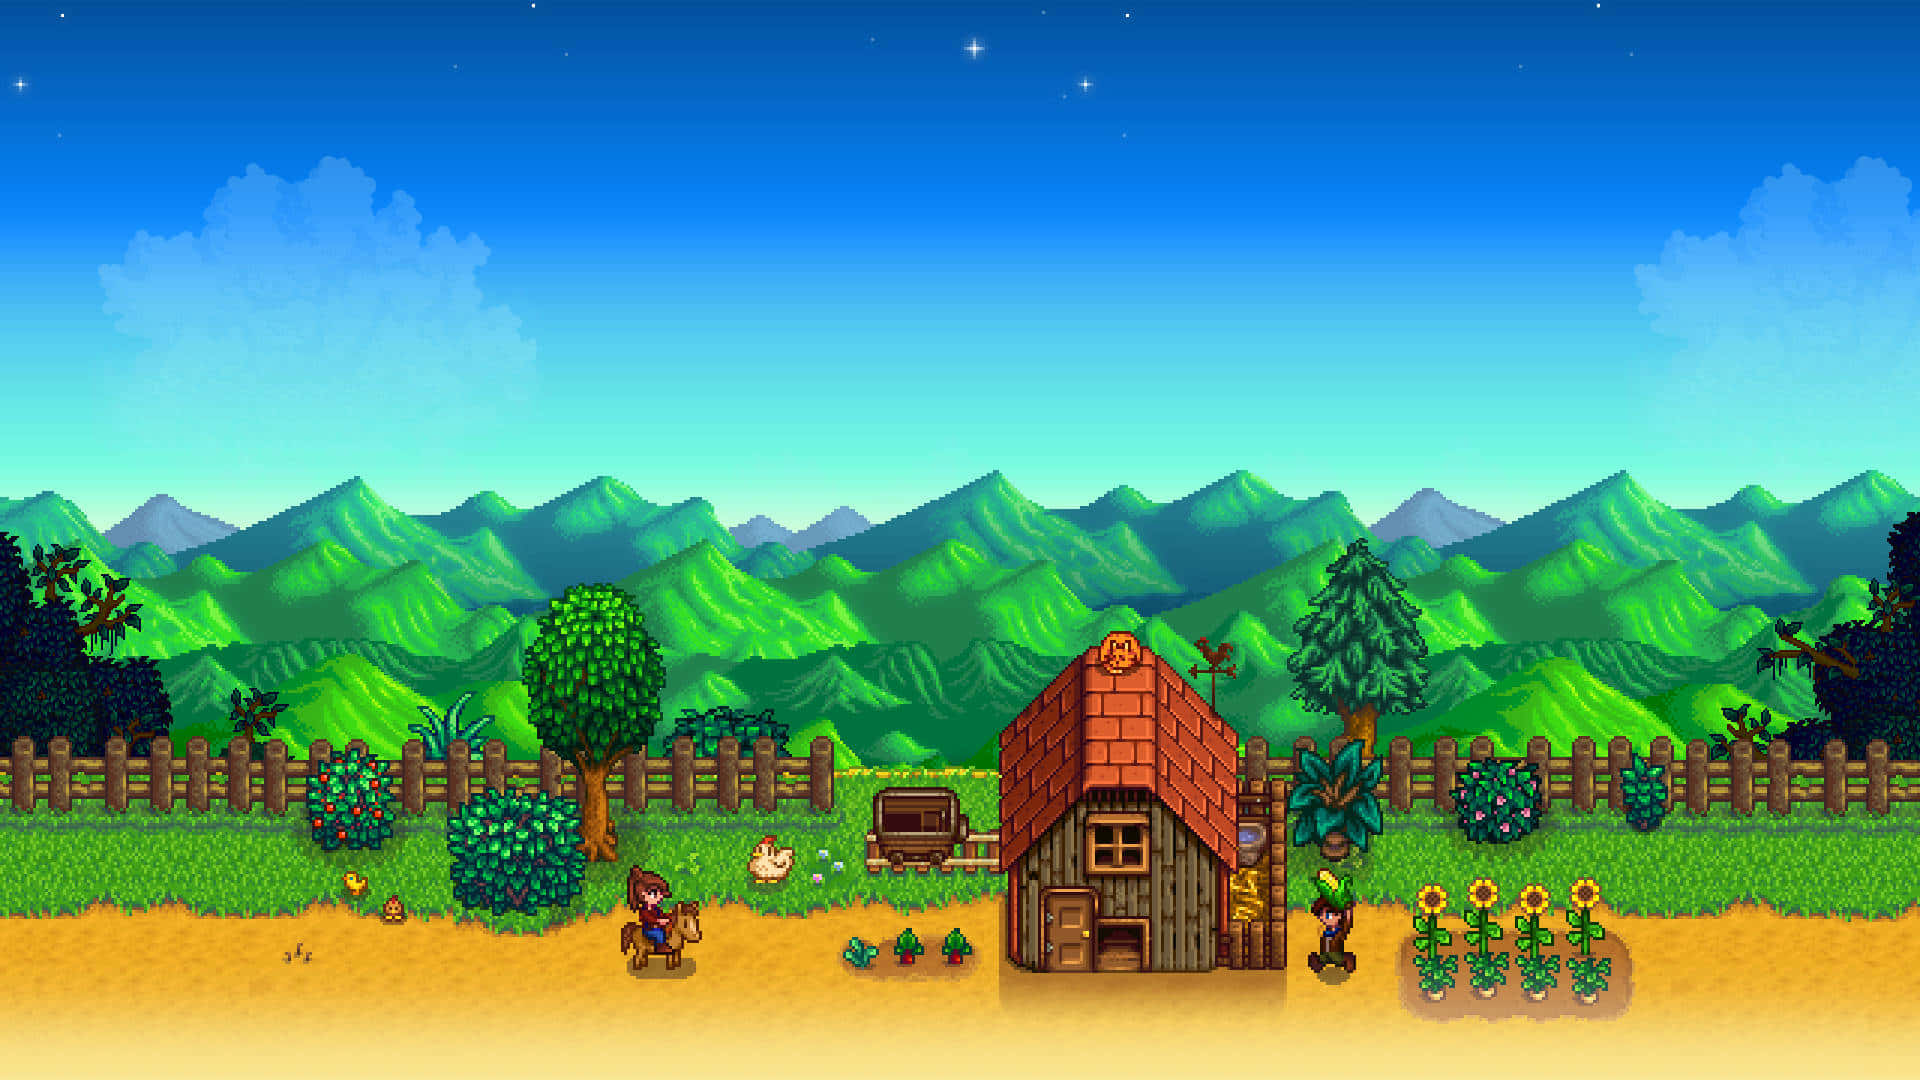 "The Magic of Stardew Valley"